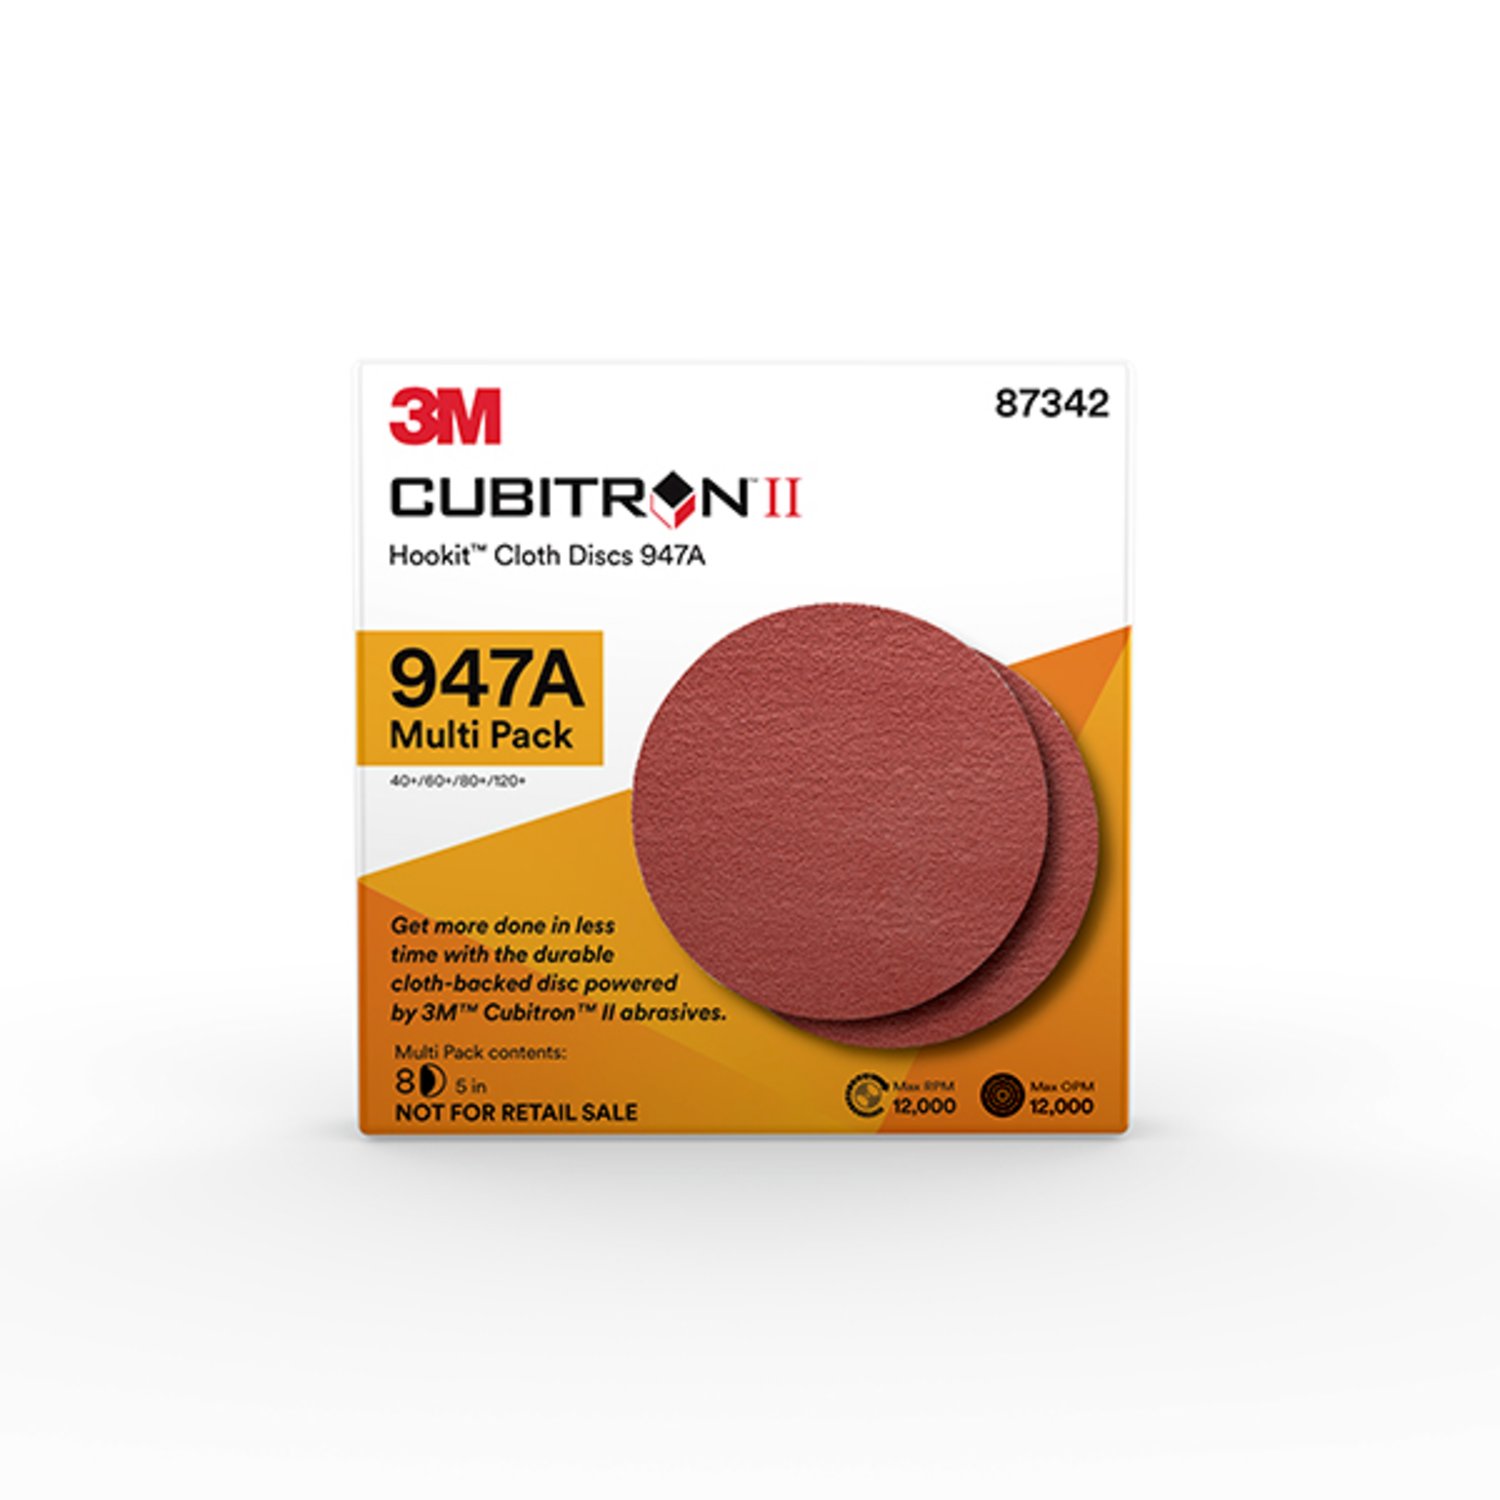 7010327613 - 3M Cubitron II Hookit Cloth Disc 947A, 87342, 5 x NH, 40+ to 120+, 20
Packs/Case, Multi-pack